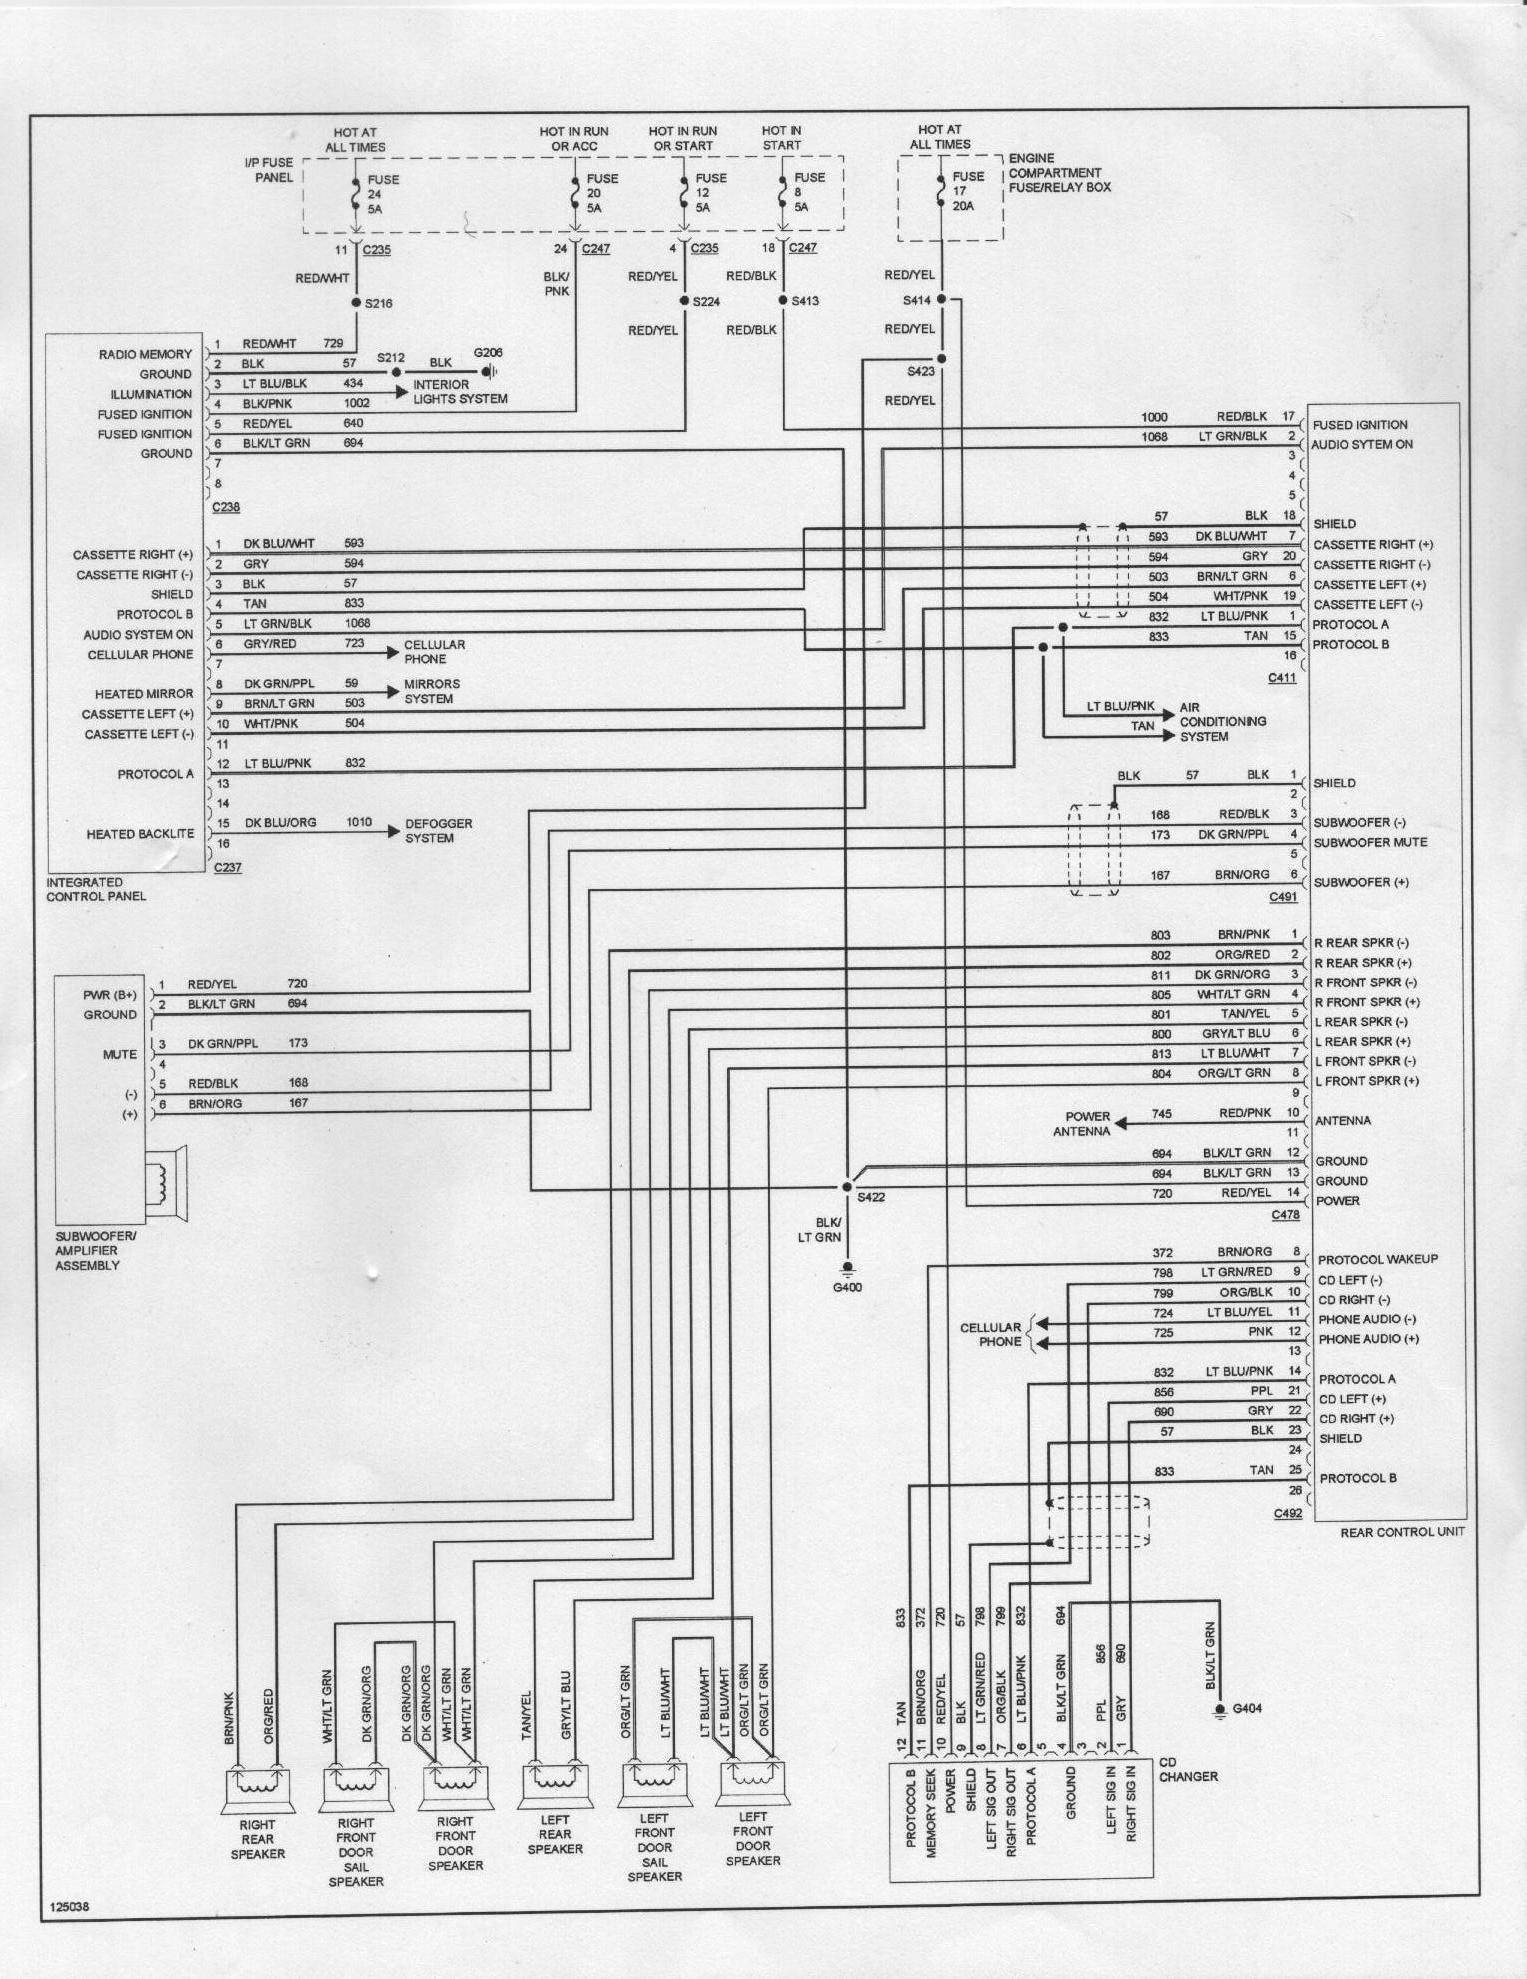 2002 Ford Taurus Stereo Wiring Diagram from detoxicrecenze.com